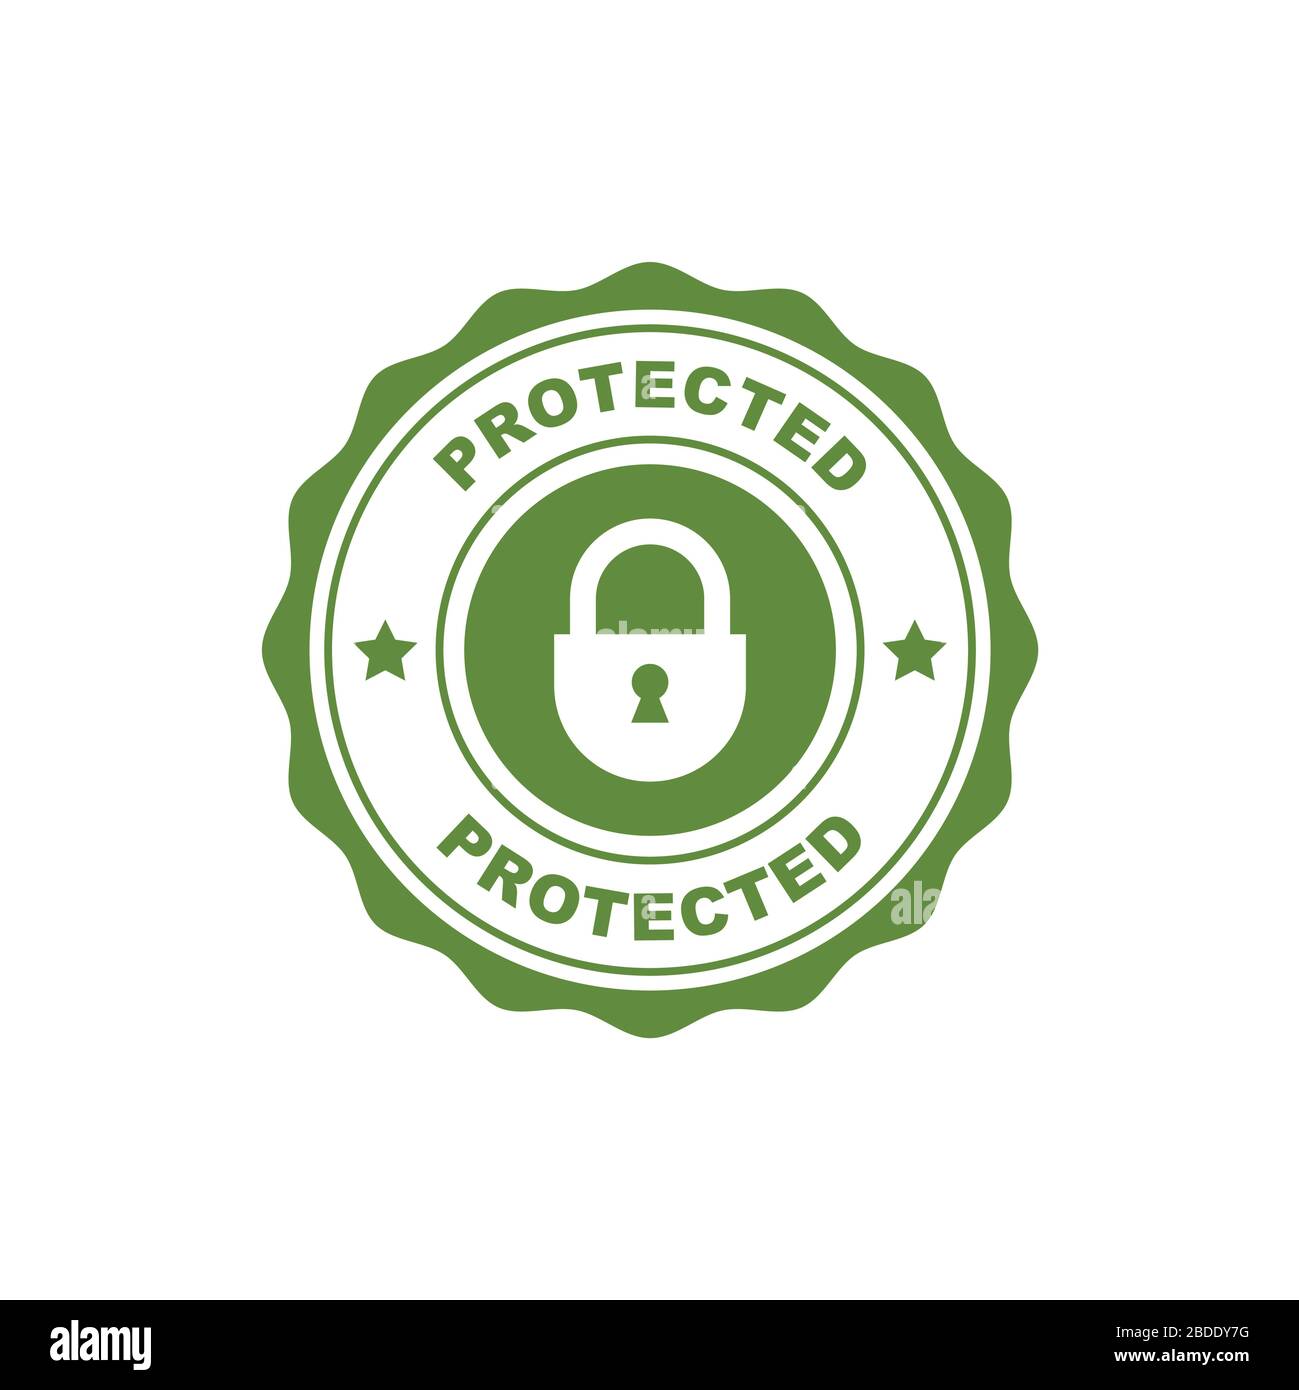 Protected - security and safety seal with padlock, symbol of defence standard Stock Vector